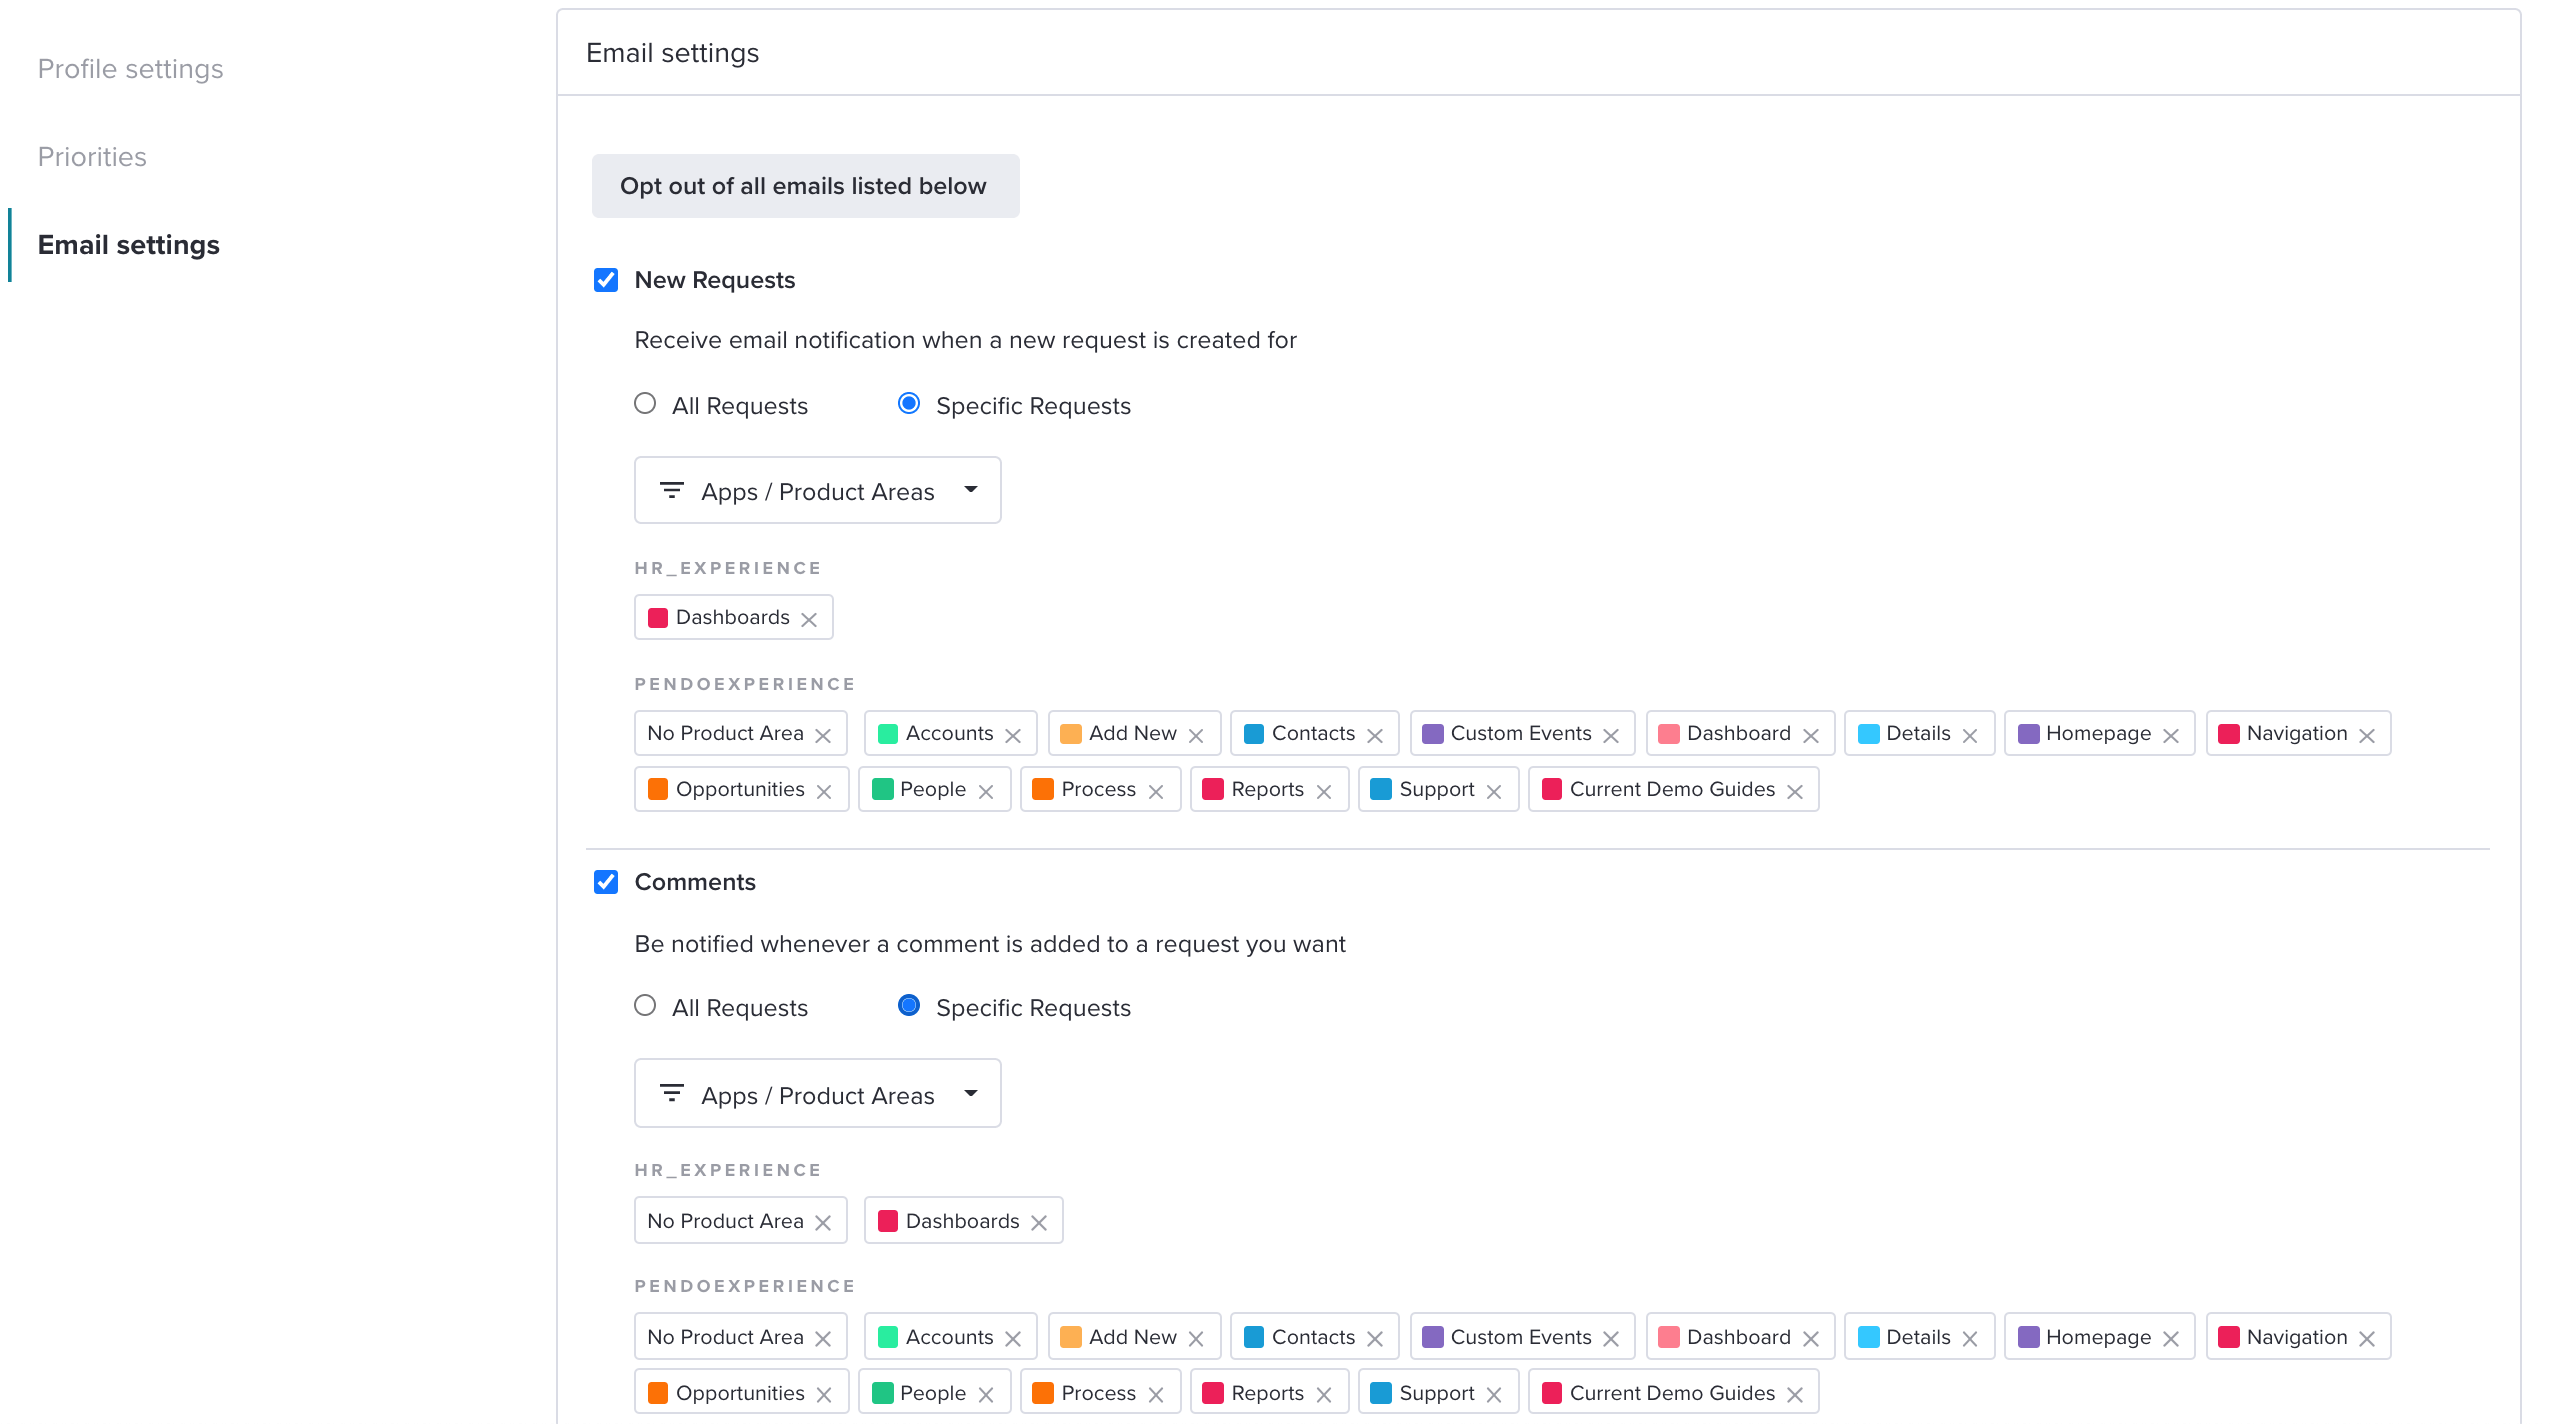 feedback_email_settings.png